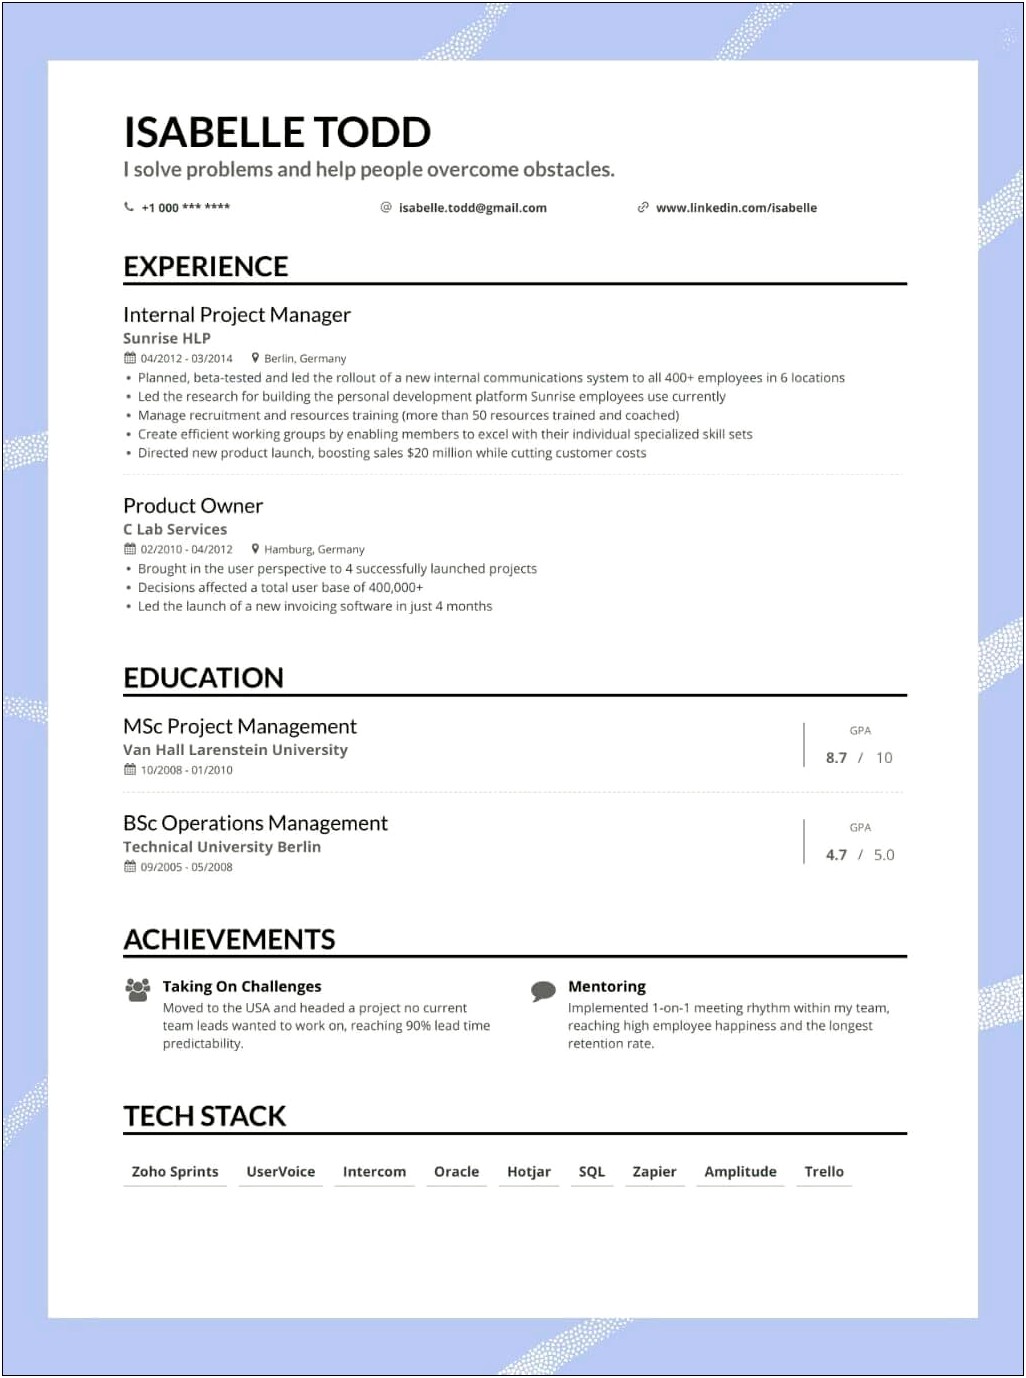 Sample Of Resume With Temporary Jobs